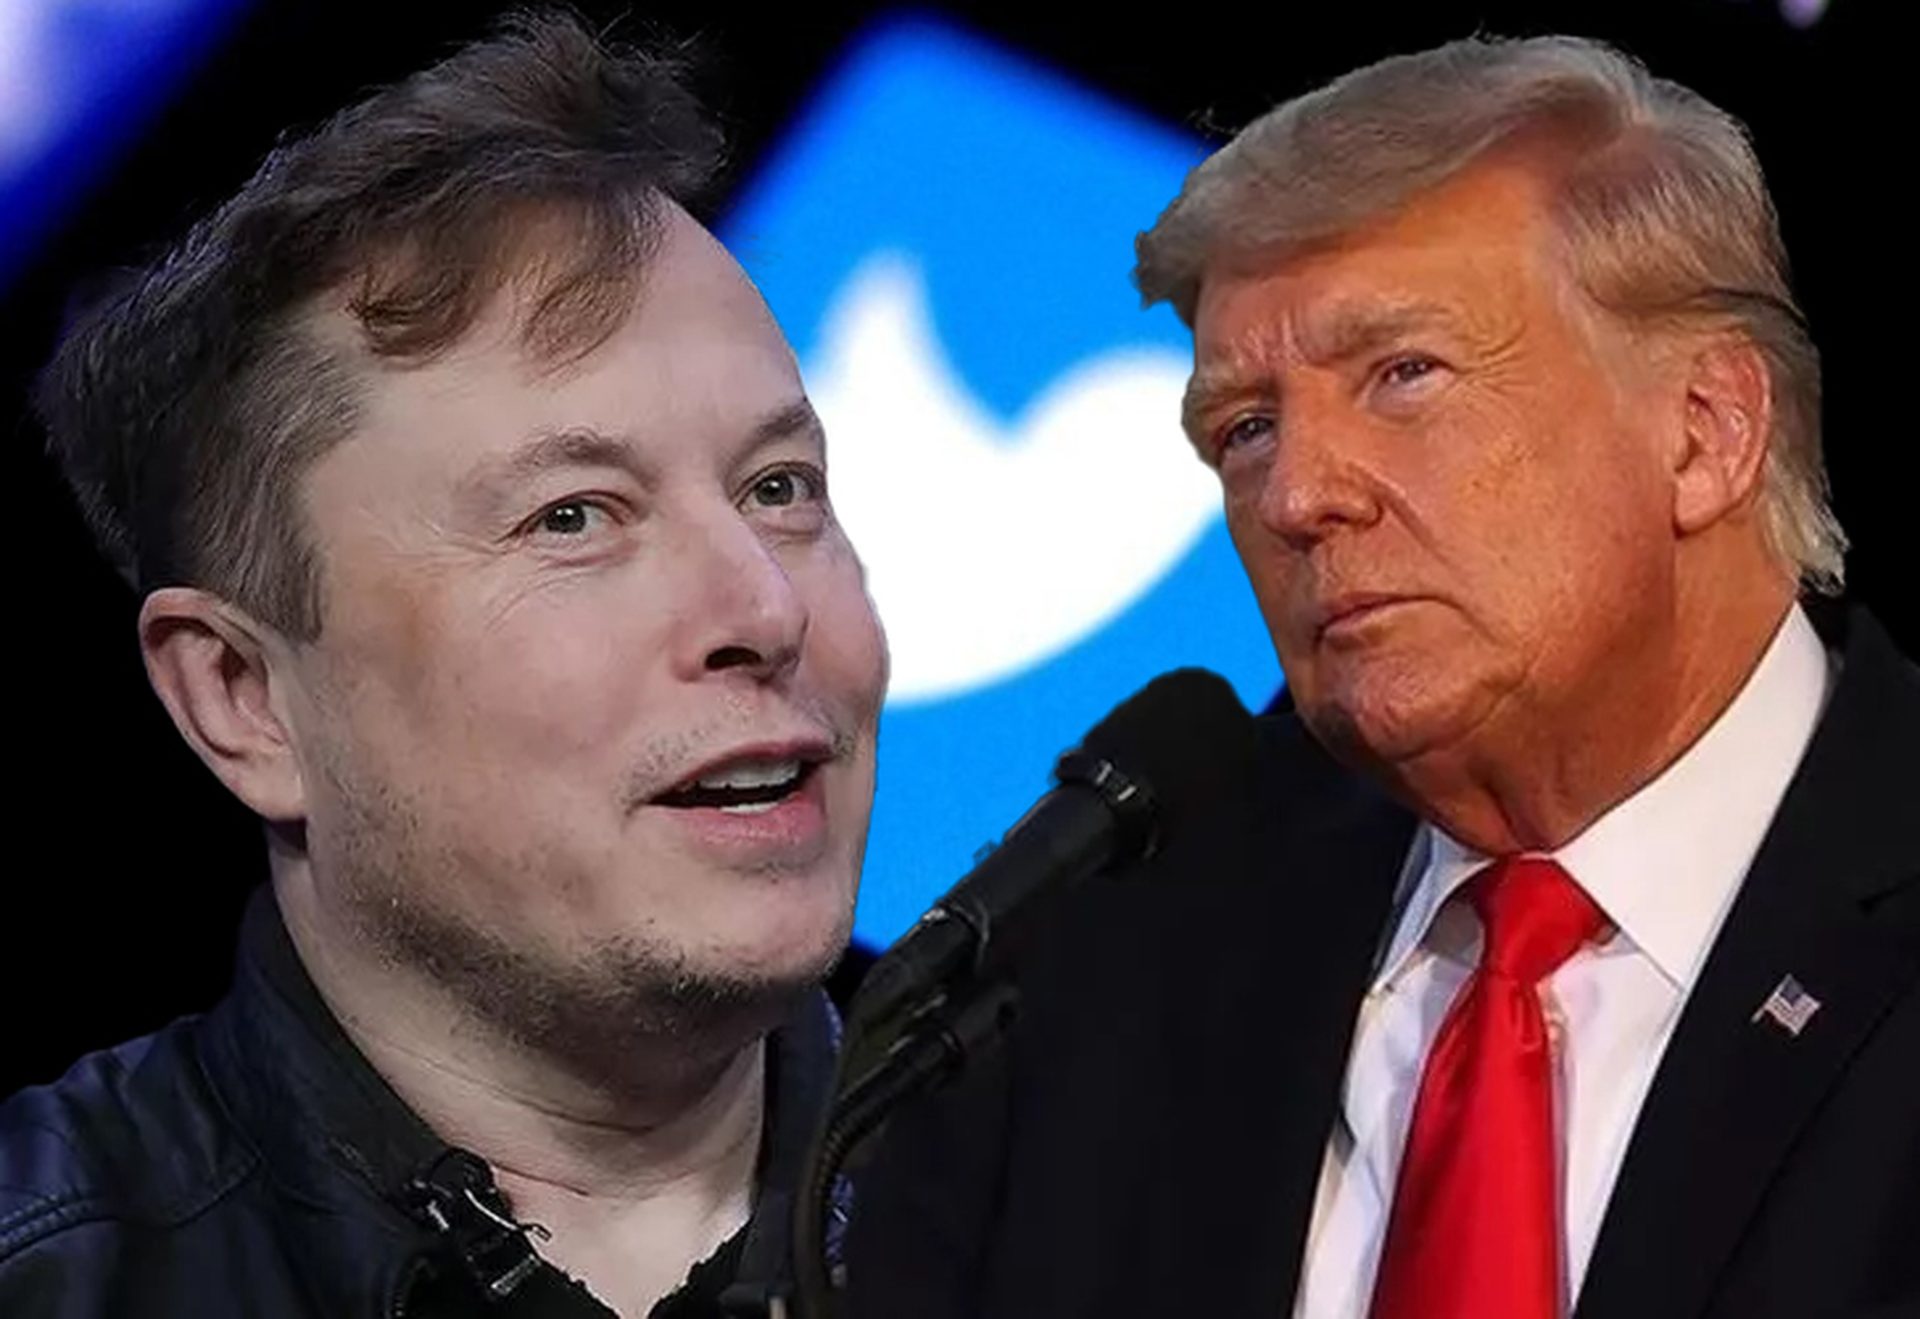 Donald Trump Elon Musk tweet: "Musk drop to his knees and beg for help"